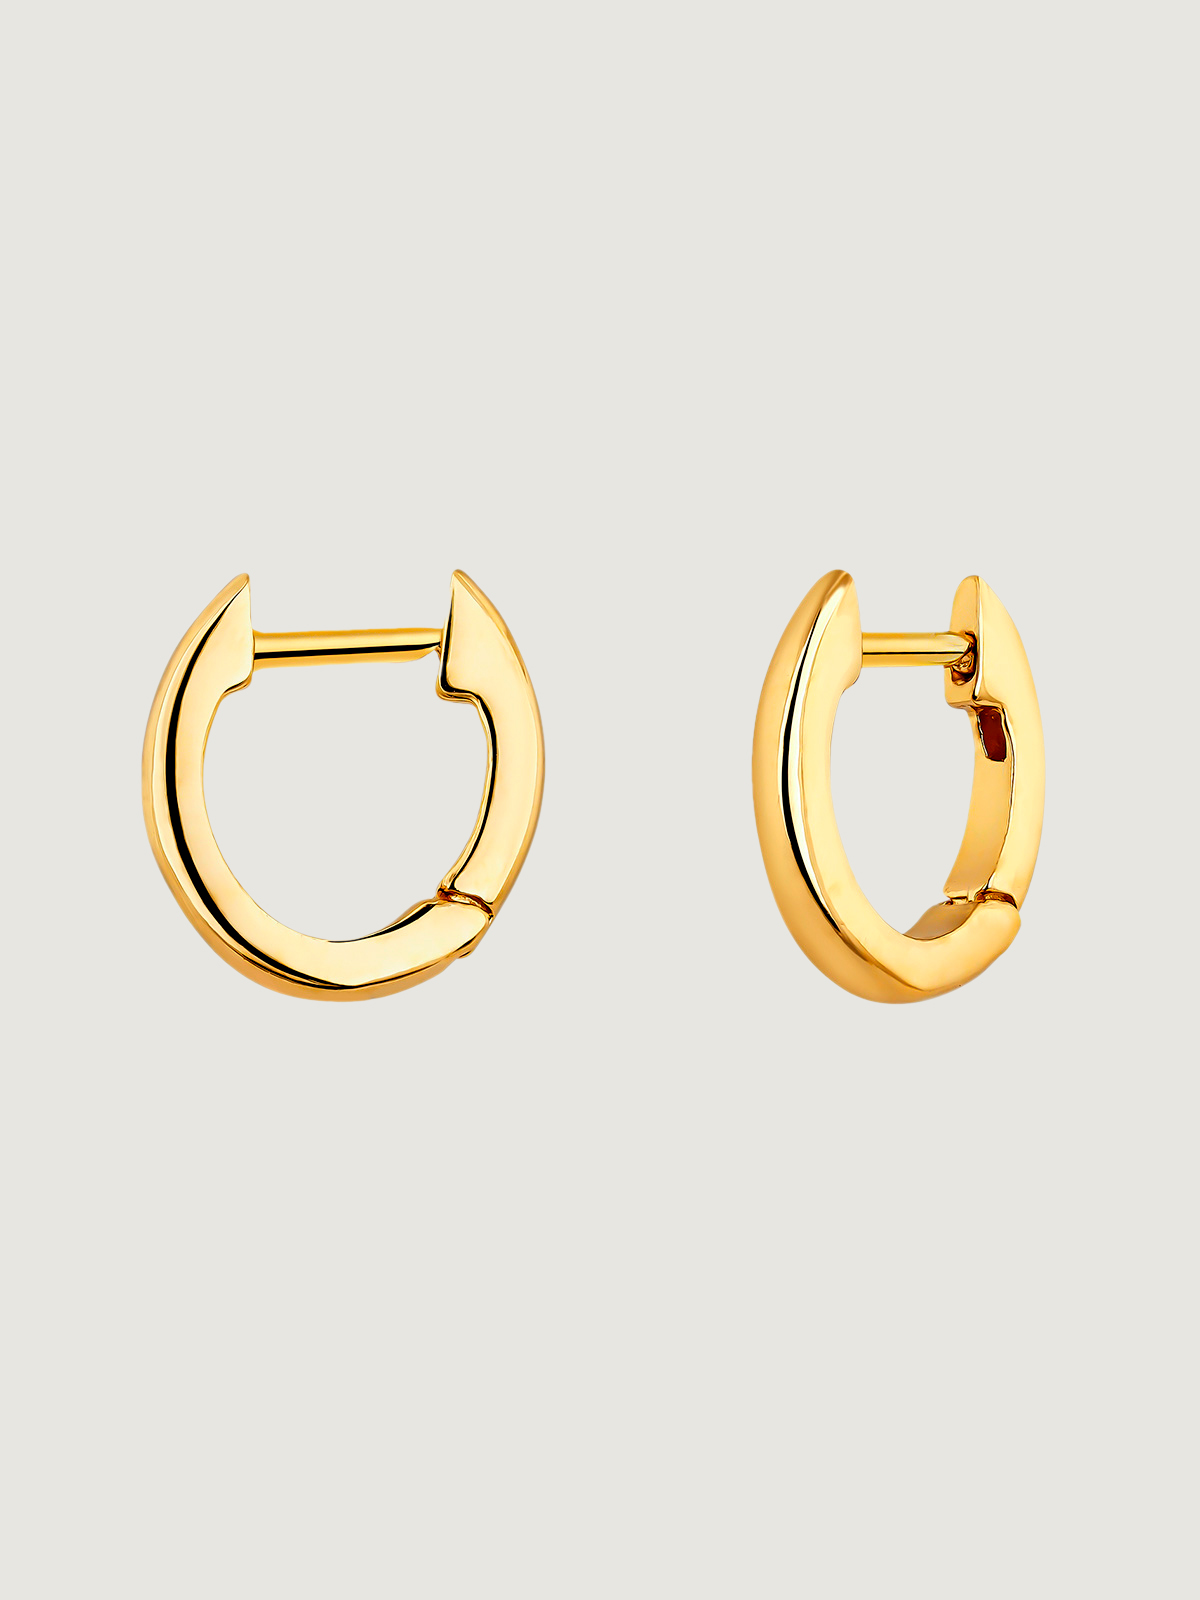 Small hoop earrings made of 925 silver, bathed in 18K yellow gold